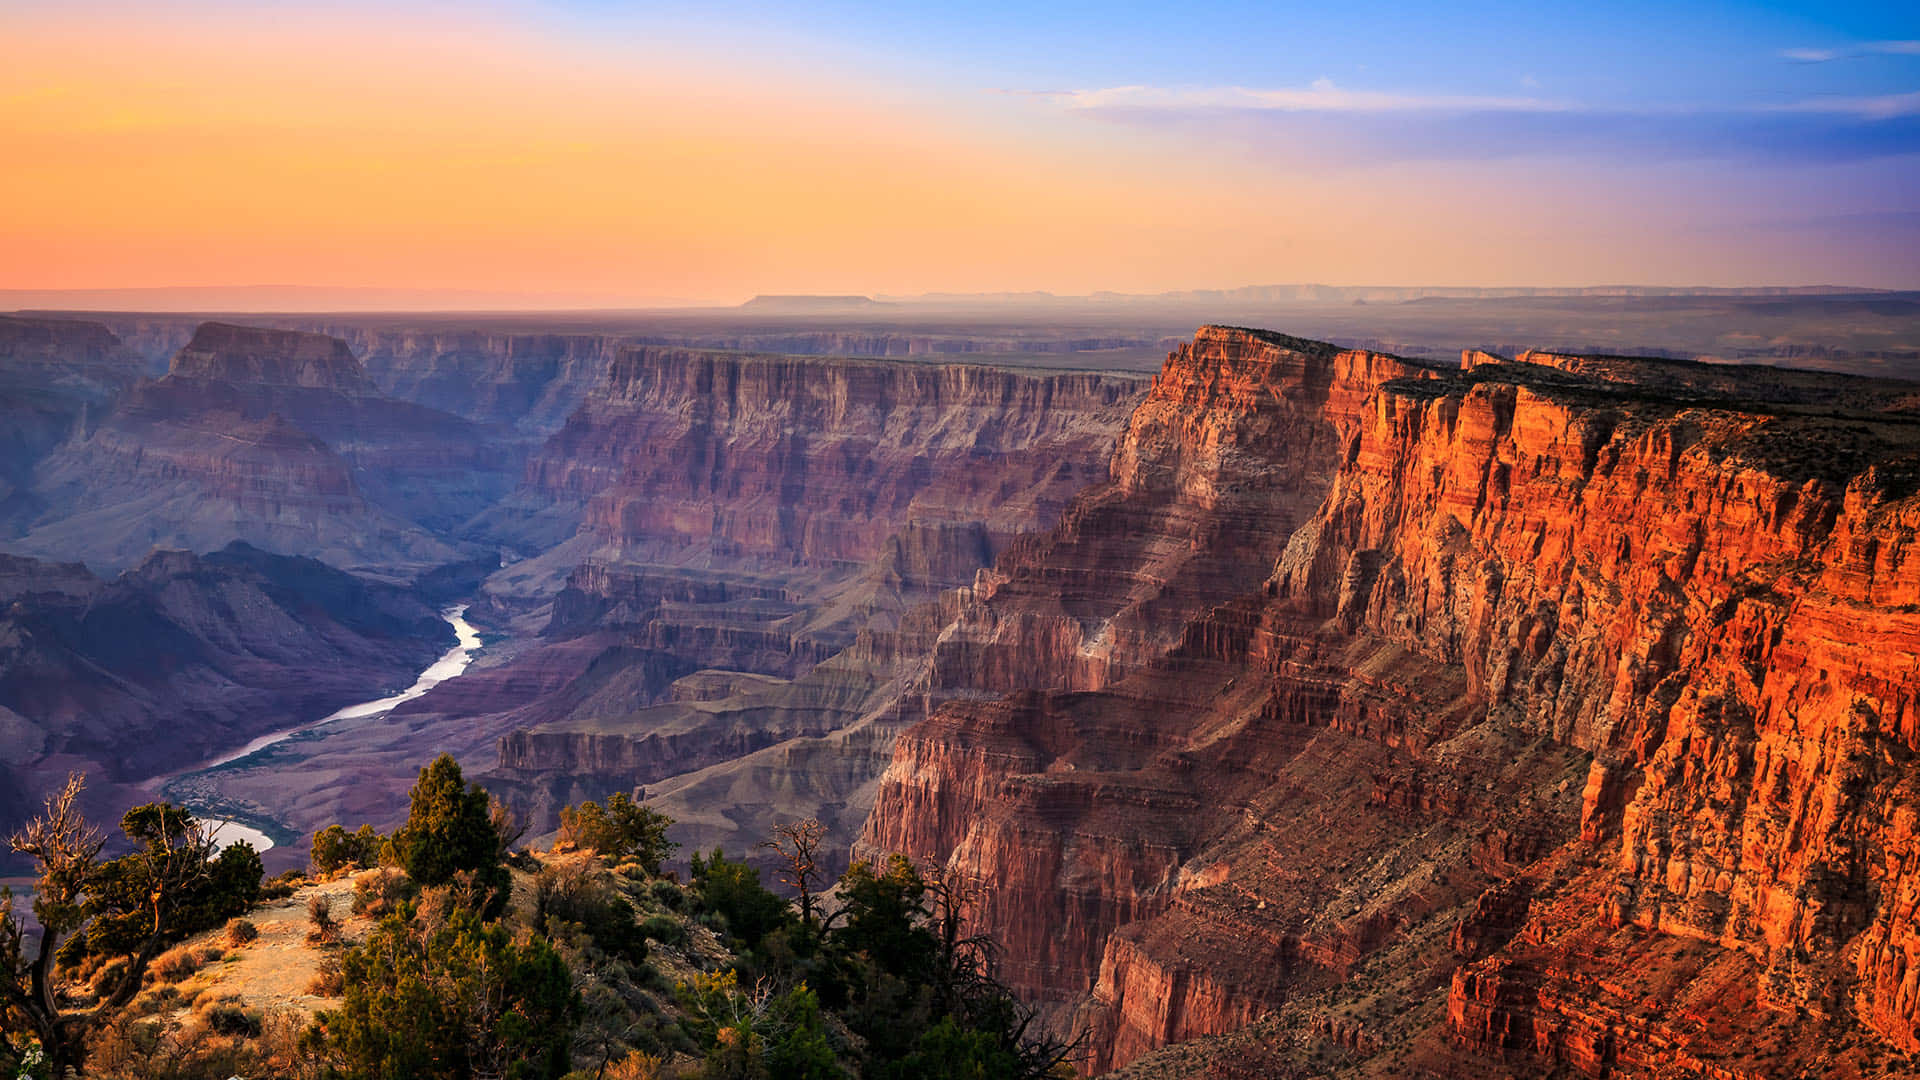 Explore the stunning Grand Canyon!